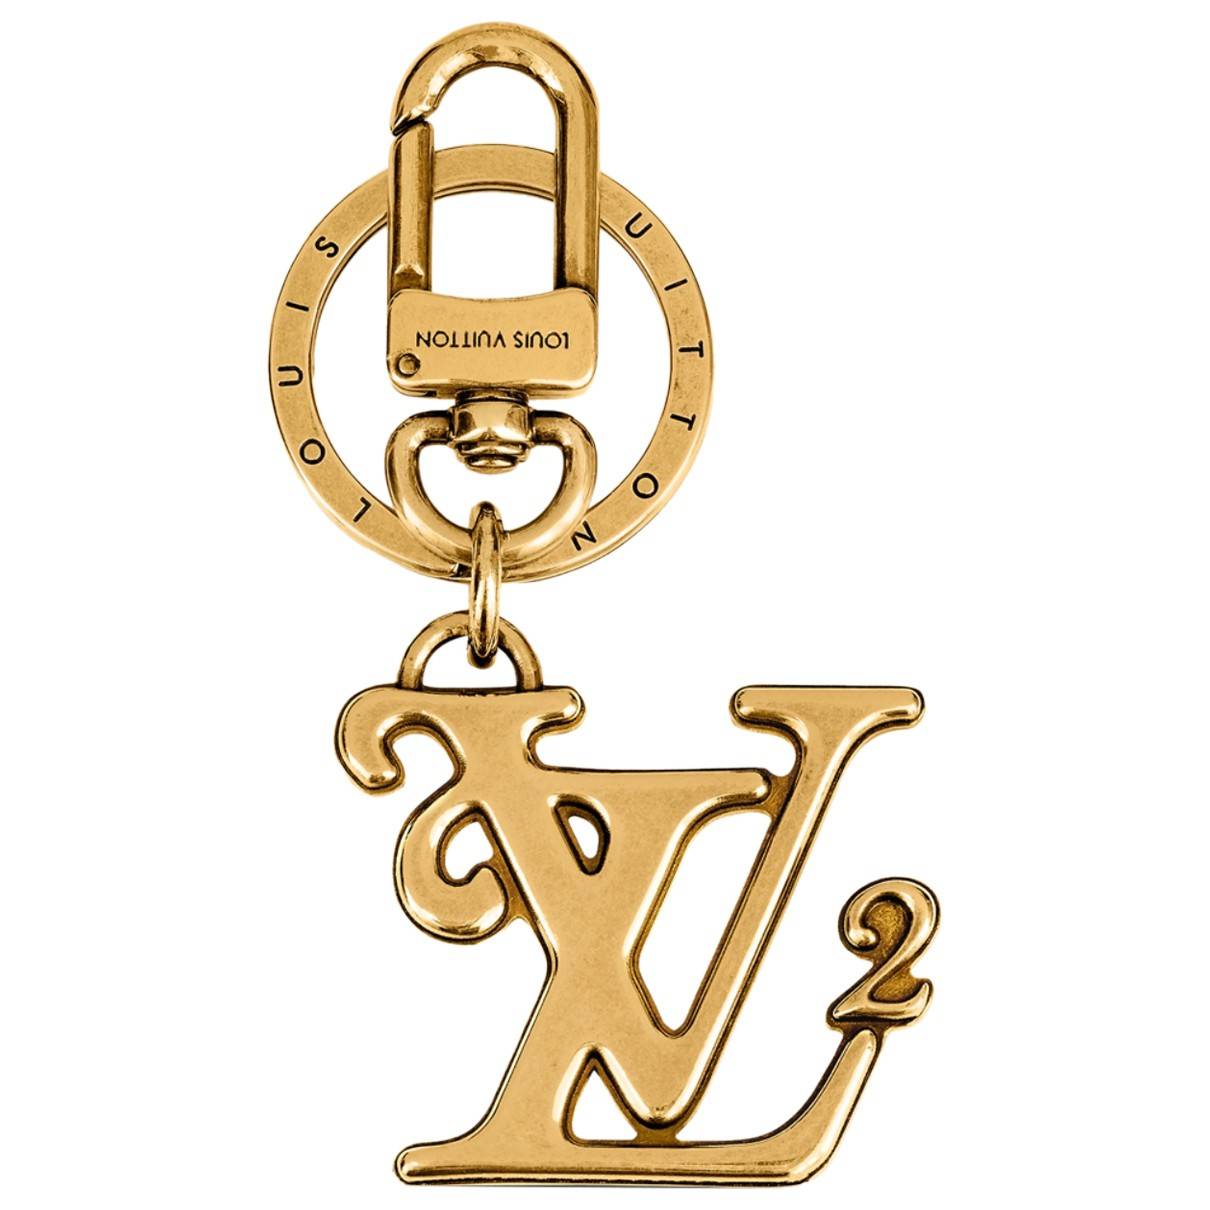 Louis Vuitton Goldtone Metal Trunk Key Holder and Bag Charm